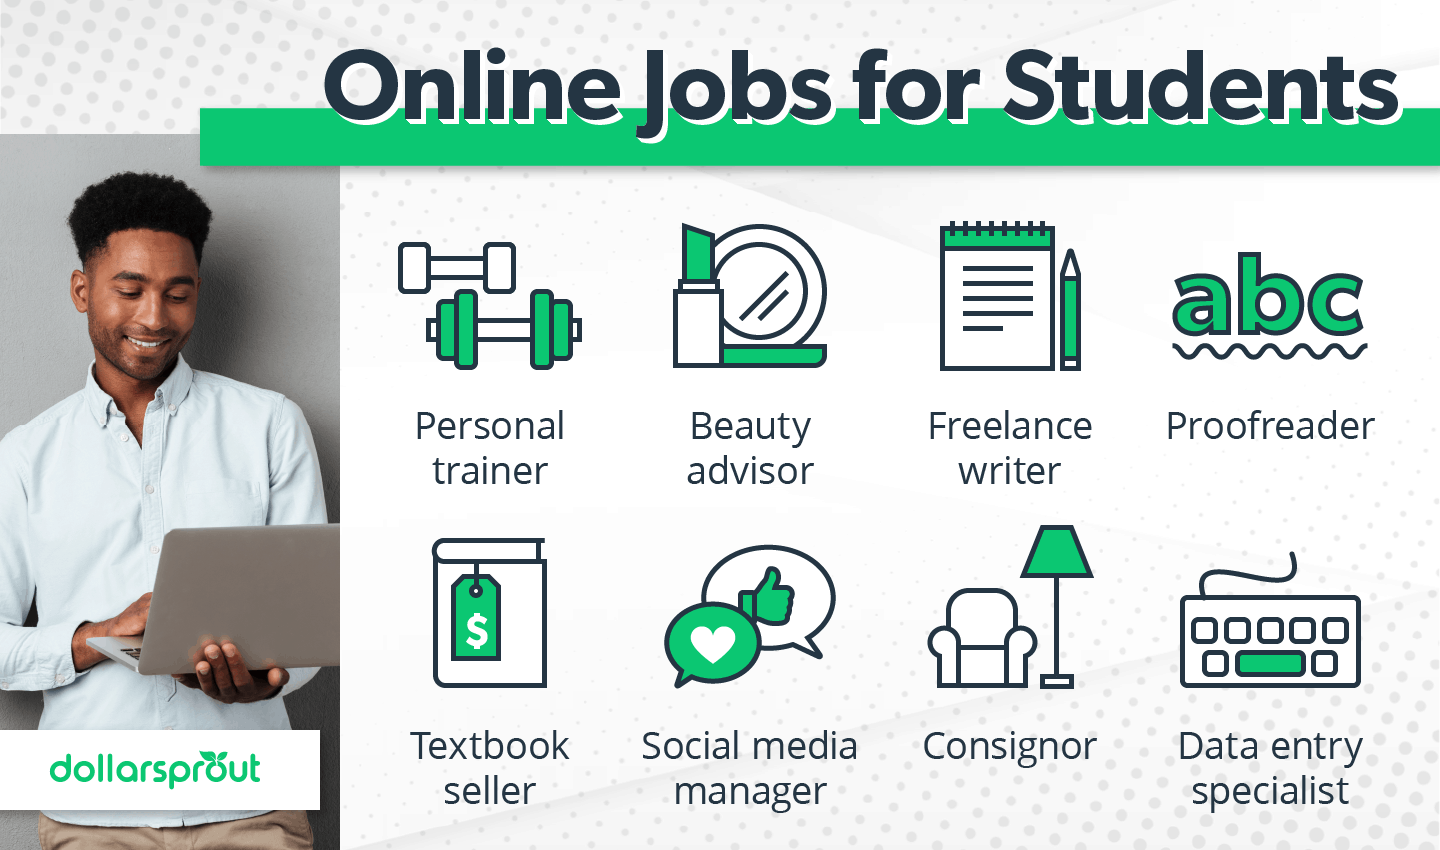 Online Jobs for Students